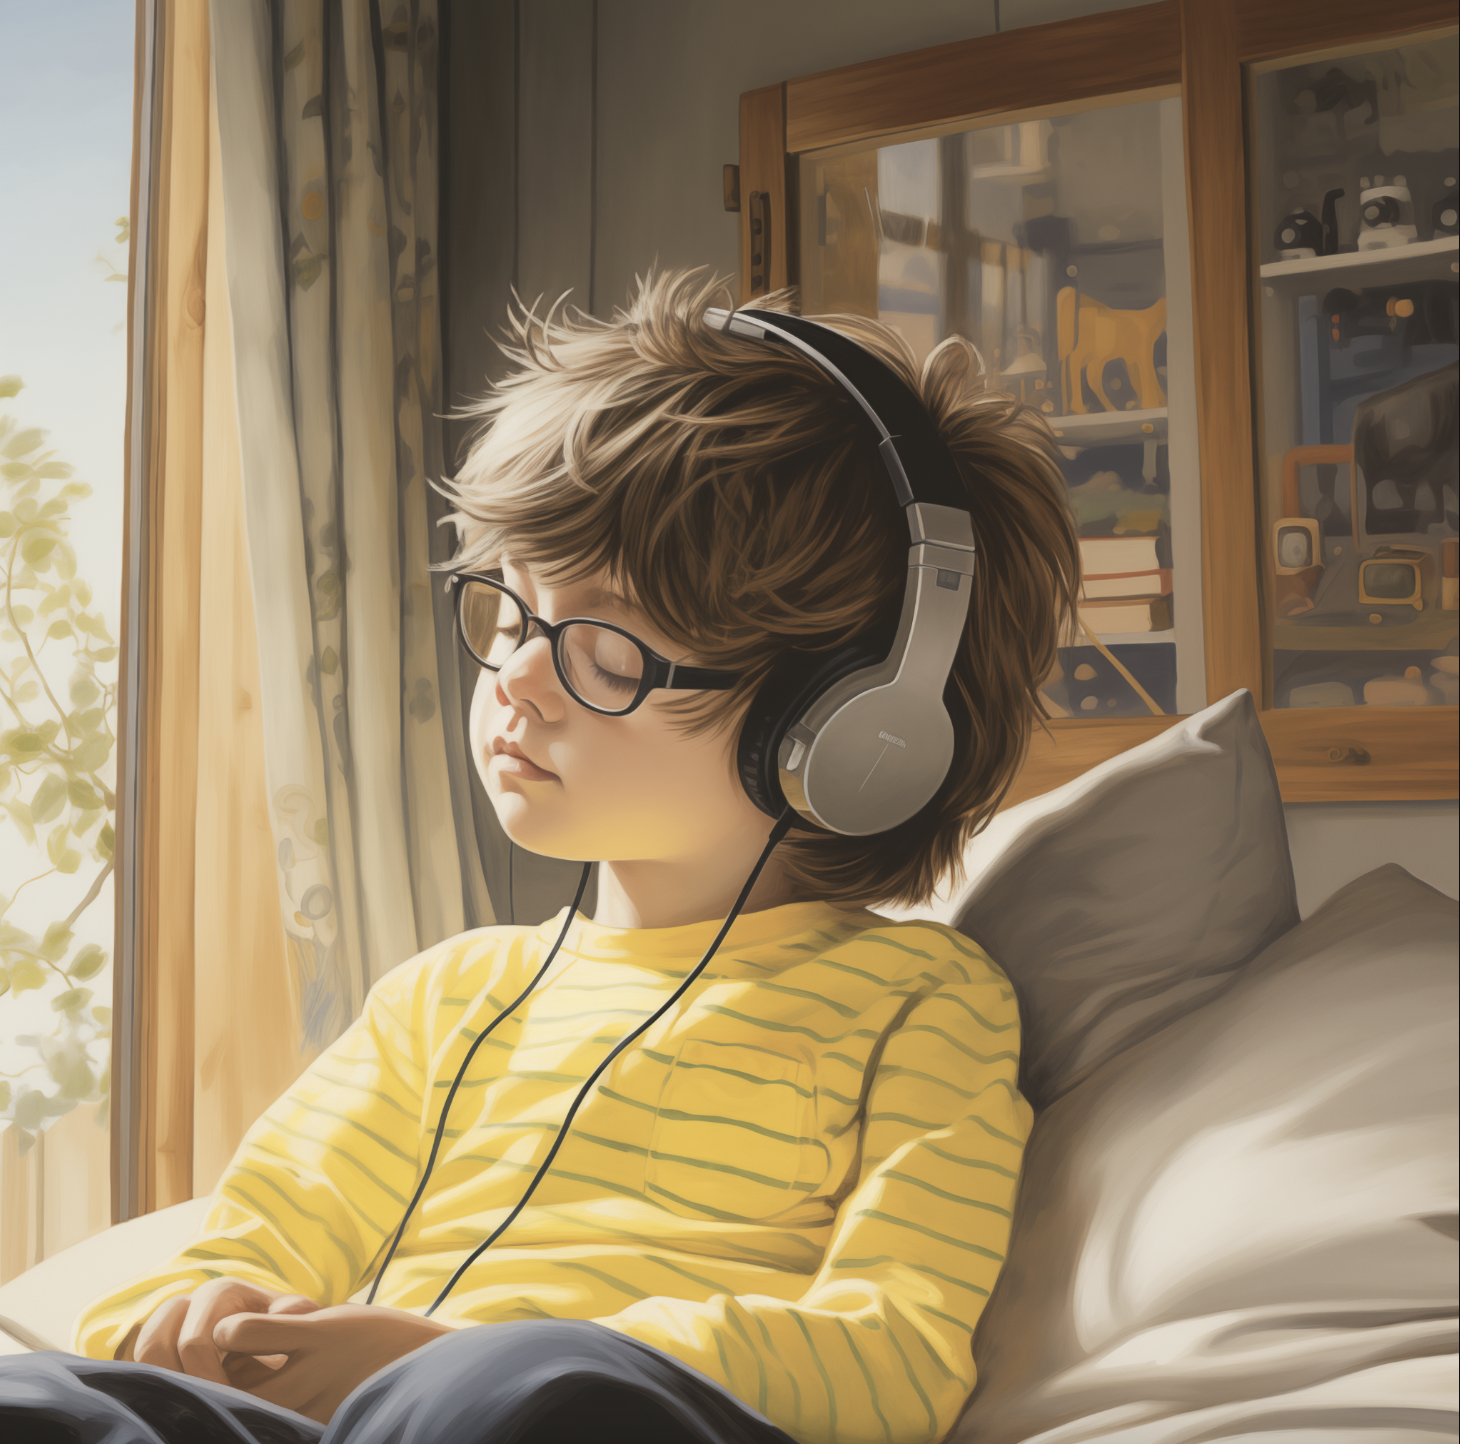 Child with headset